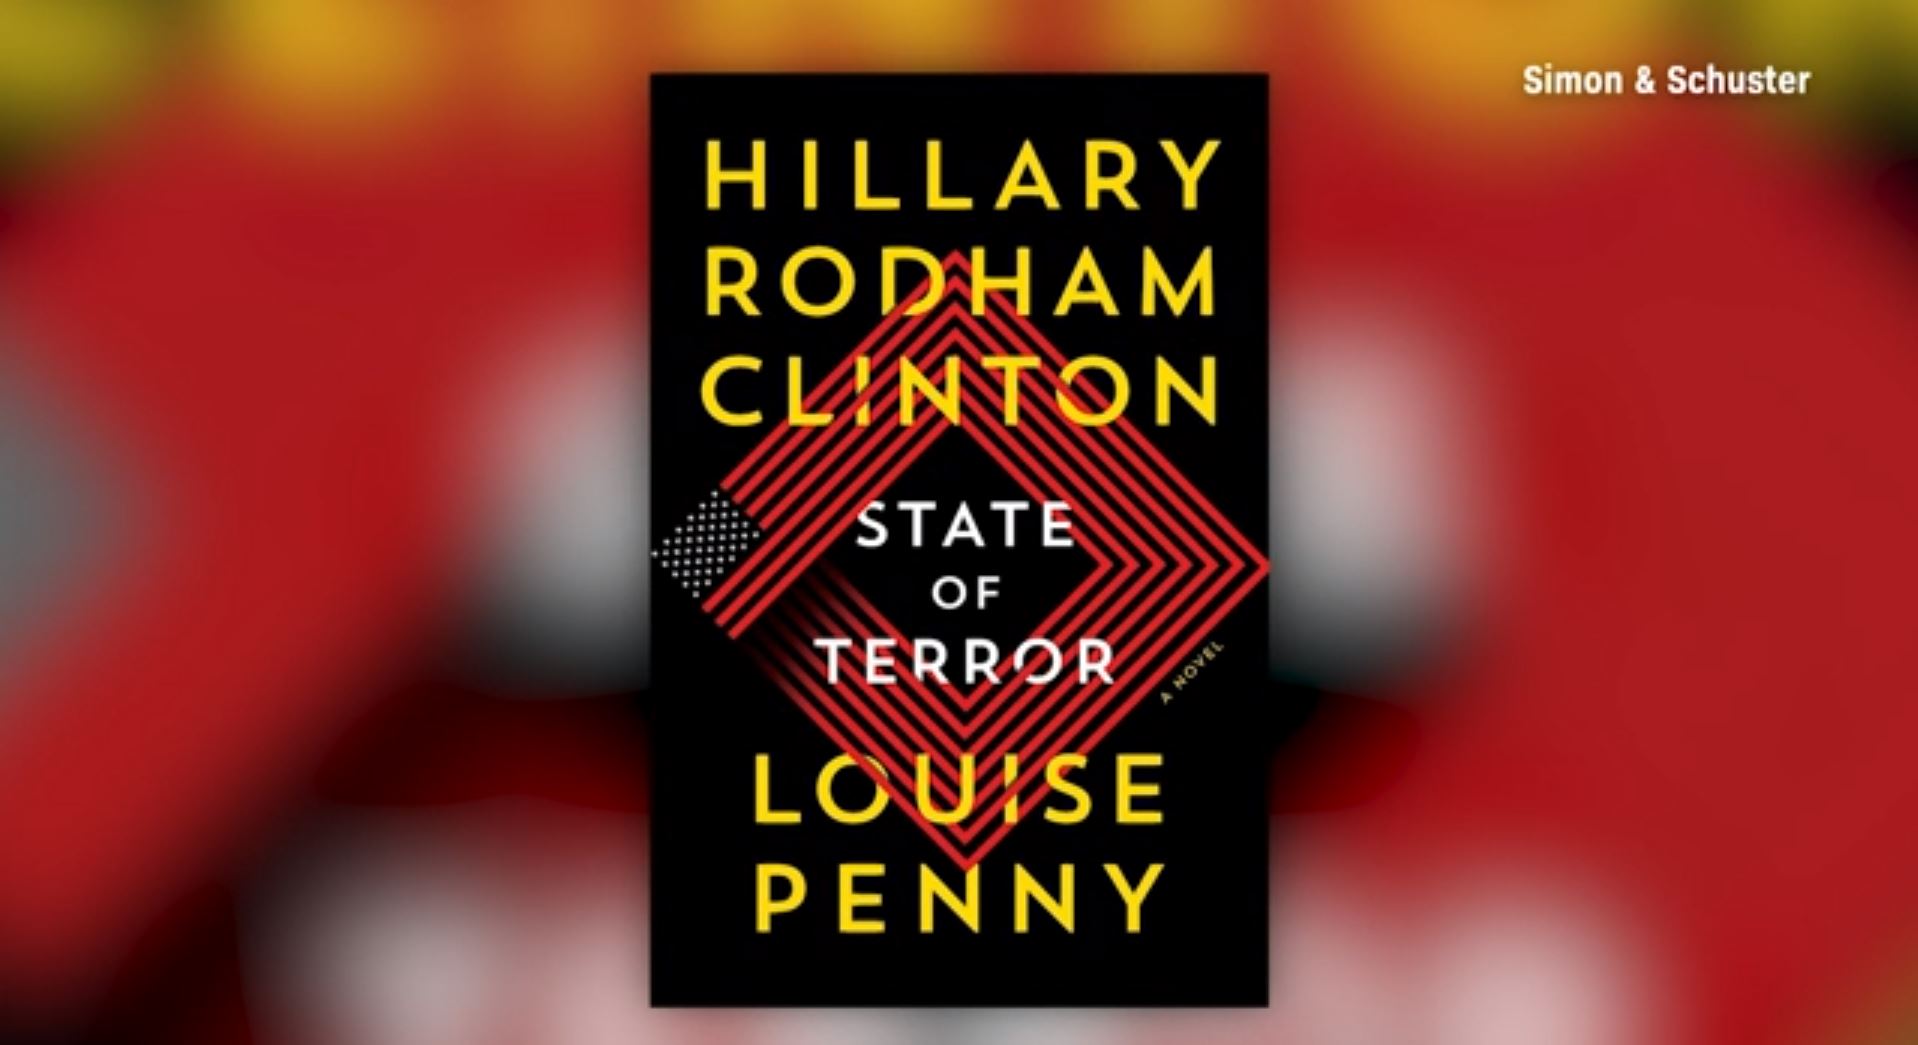 Hillary Clinton and Louise Penny tackle nuclear war and diplomacy in new  crime novel